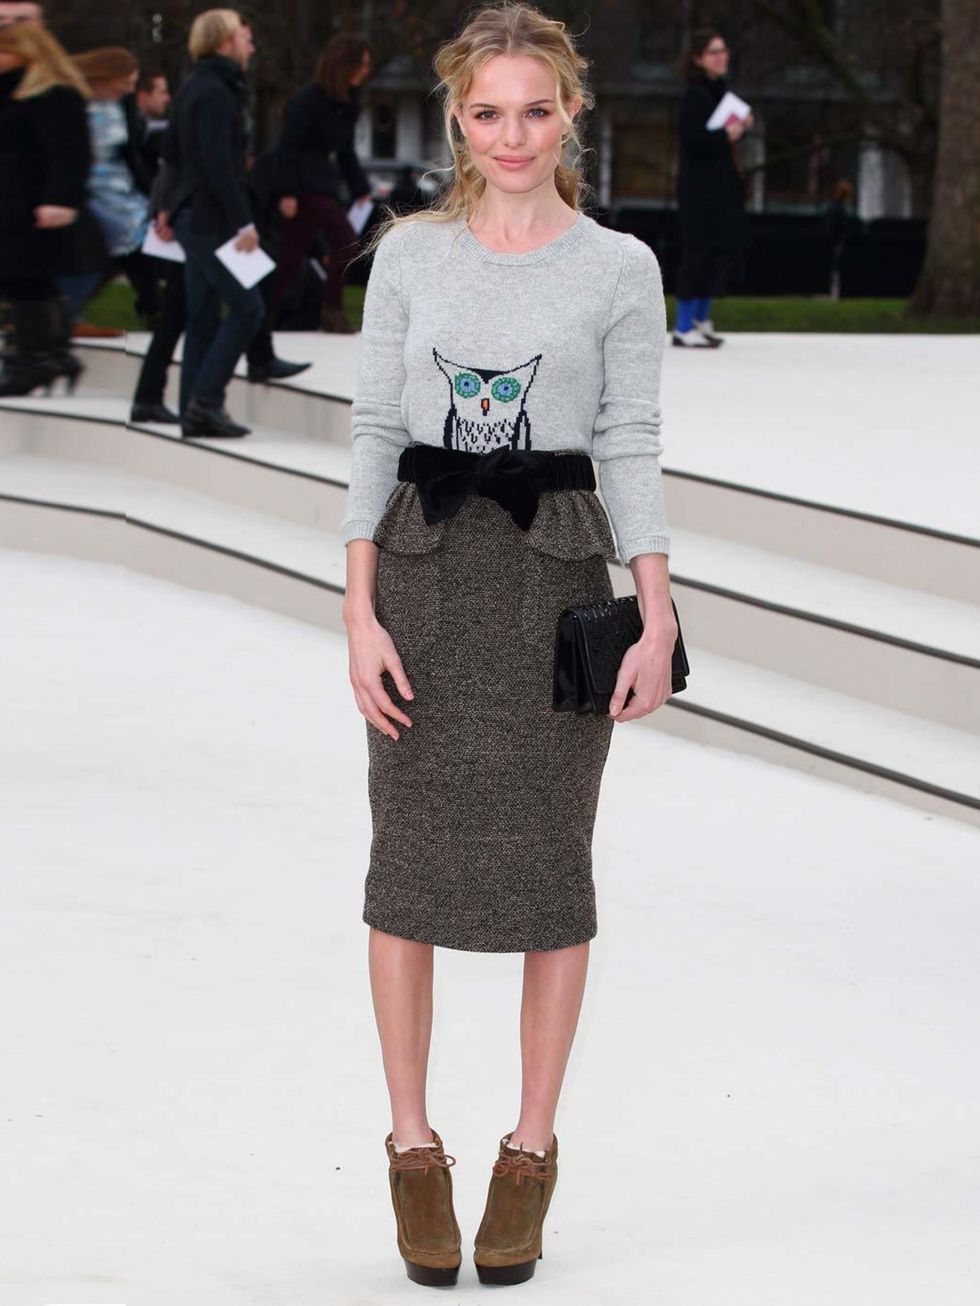 <p><a href="http://www.elleuk.com/star-style/celebrity-style-files/kate-bosworth">Kate Bosworth</a> wearing a bow belt with a knitted pencil skirt and printed sweater at the <a href="http://www.elleuk.com/catwalk/designer-a-z/burberry-prorsum/autumn-winte